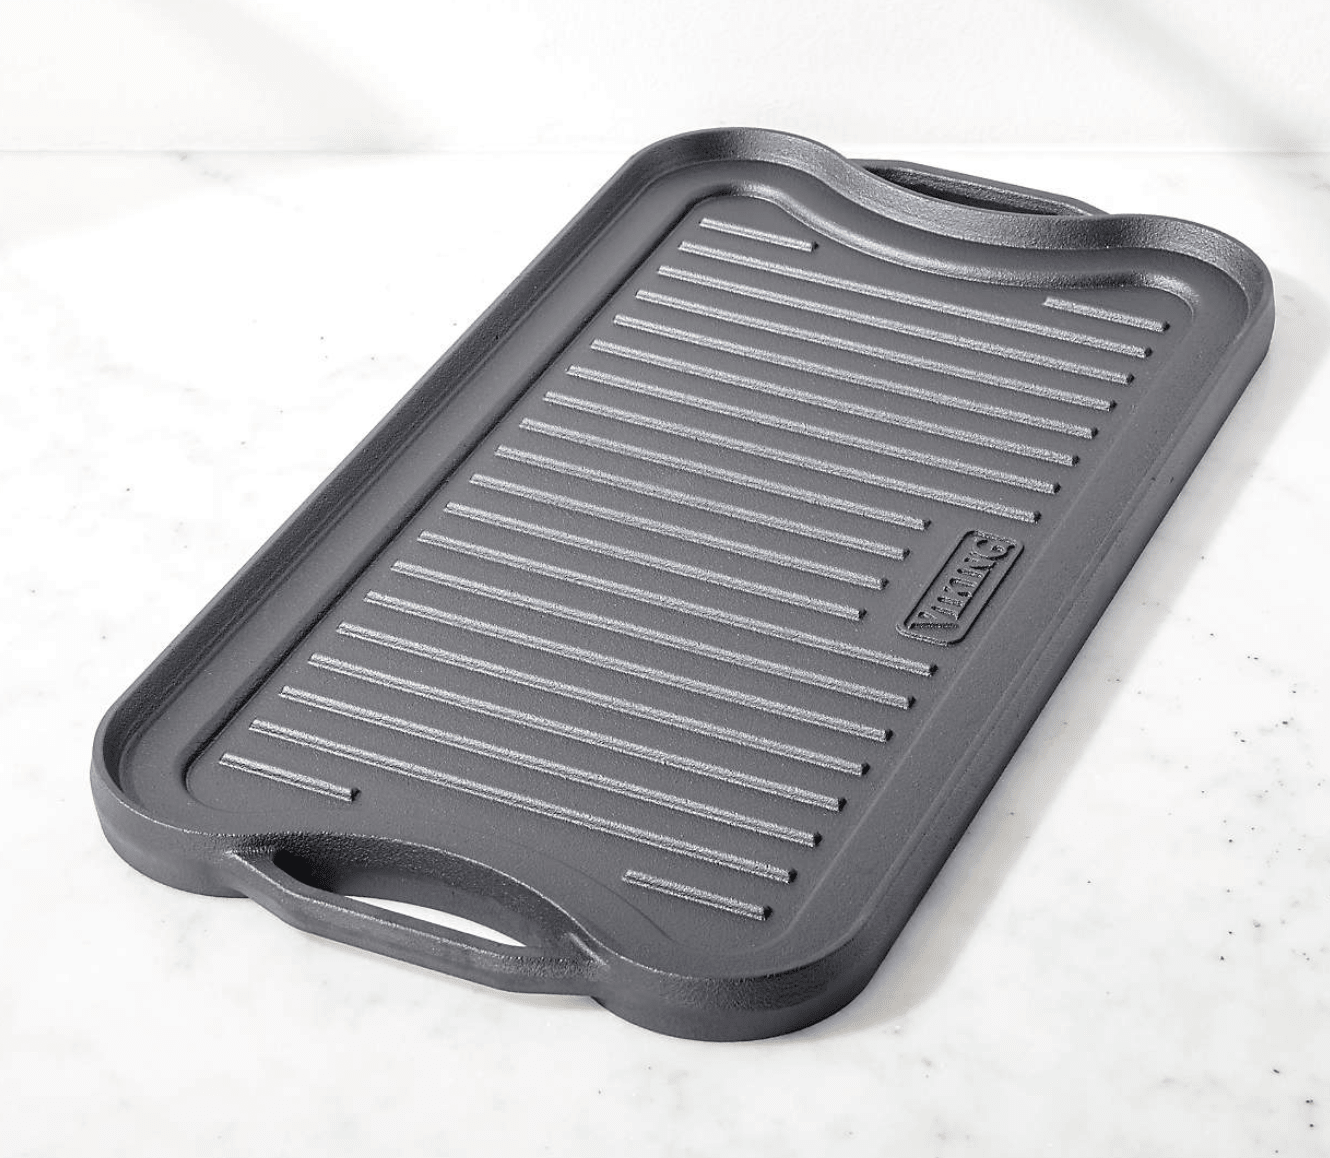 .com: CAROTE Nonstick Grill Pan, Versatile Griddle Pan for Stove  Tops, 7.5 Small Square Grill Pan, Granite Grill Skillet for Indoor  Grilling, FPAS & PFOA: Home & Kitchen